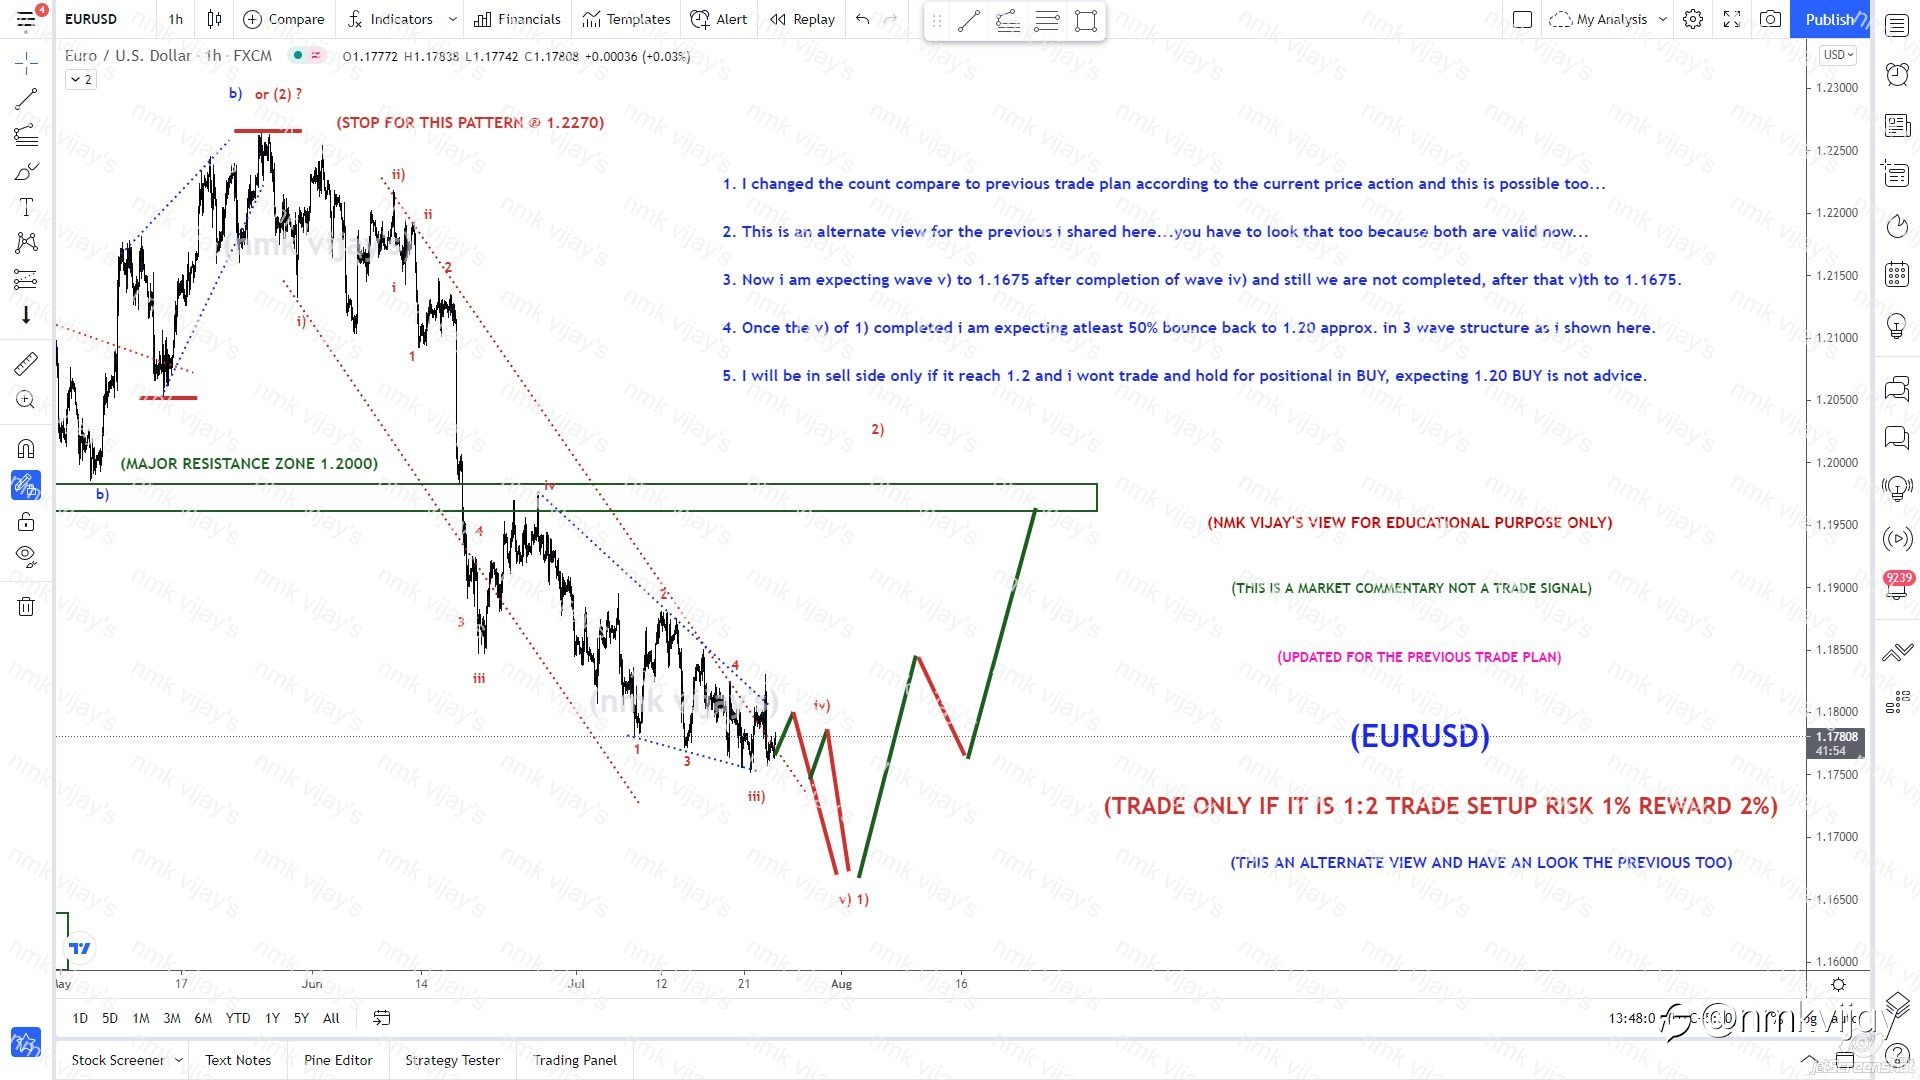 EURUSD-Still we are in iv) and yet to complete and then v)...